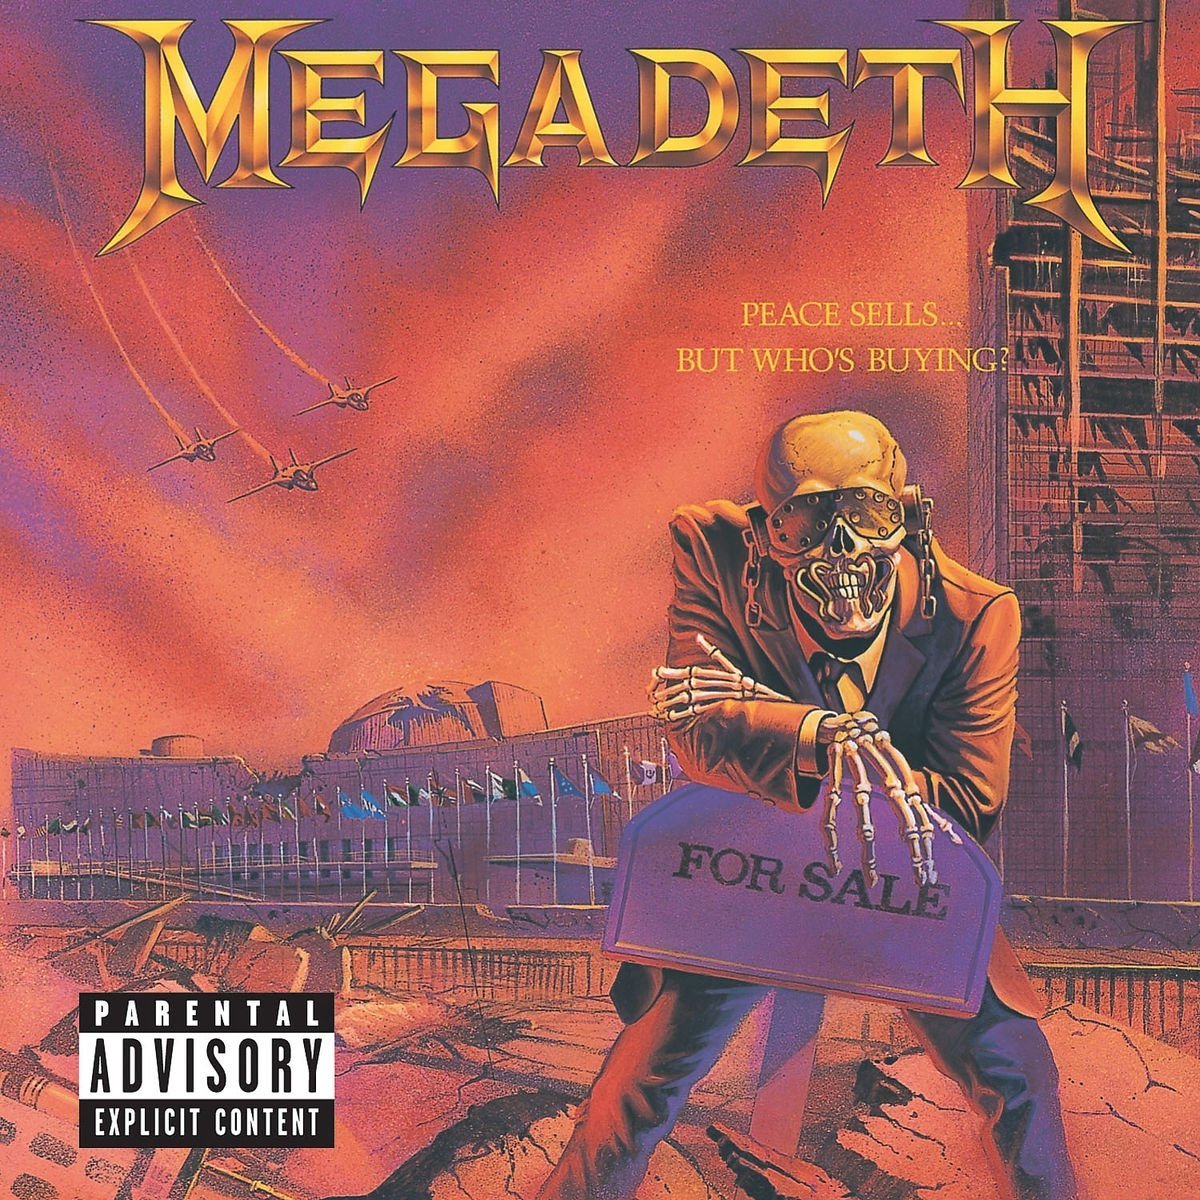 MEGADETH - PEACE SELLS BUT WHO'S BUYING (1986) - CD REMASTERED & REMIXED BONUS TRACKS EDITION JEWEL CASE SIFIR